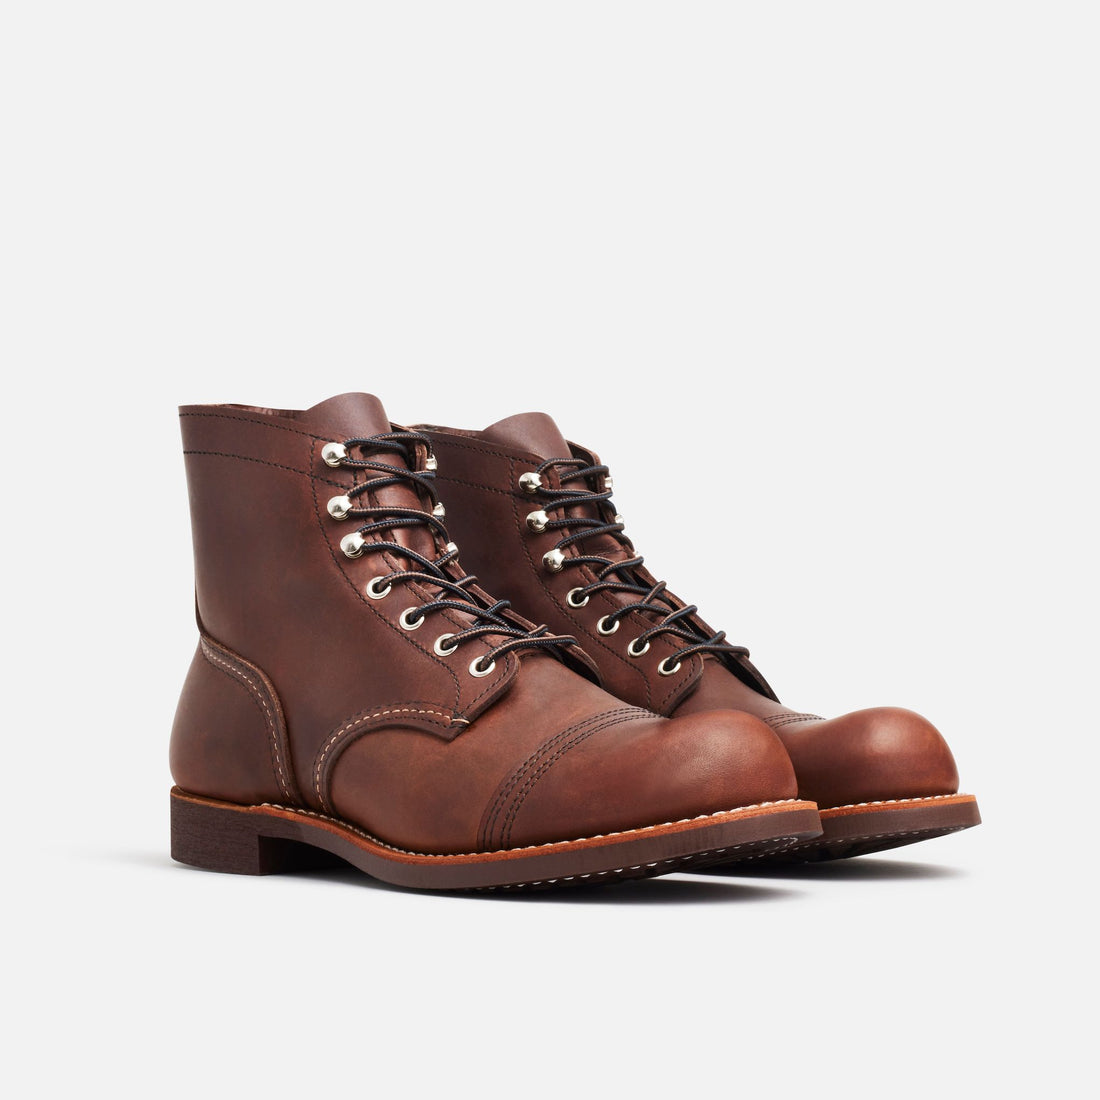 The Red Wing Iron Ranger 8111 Amber Harness